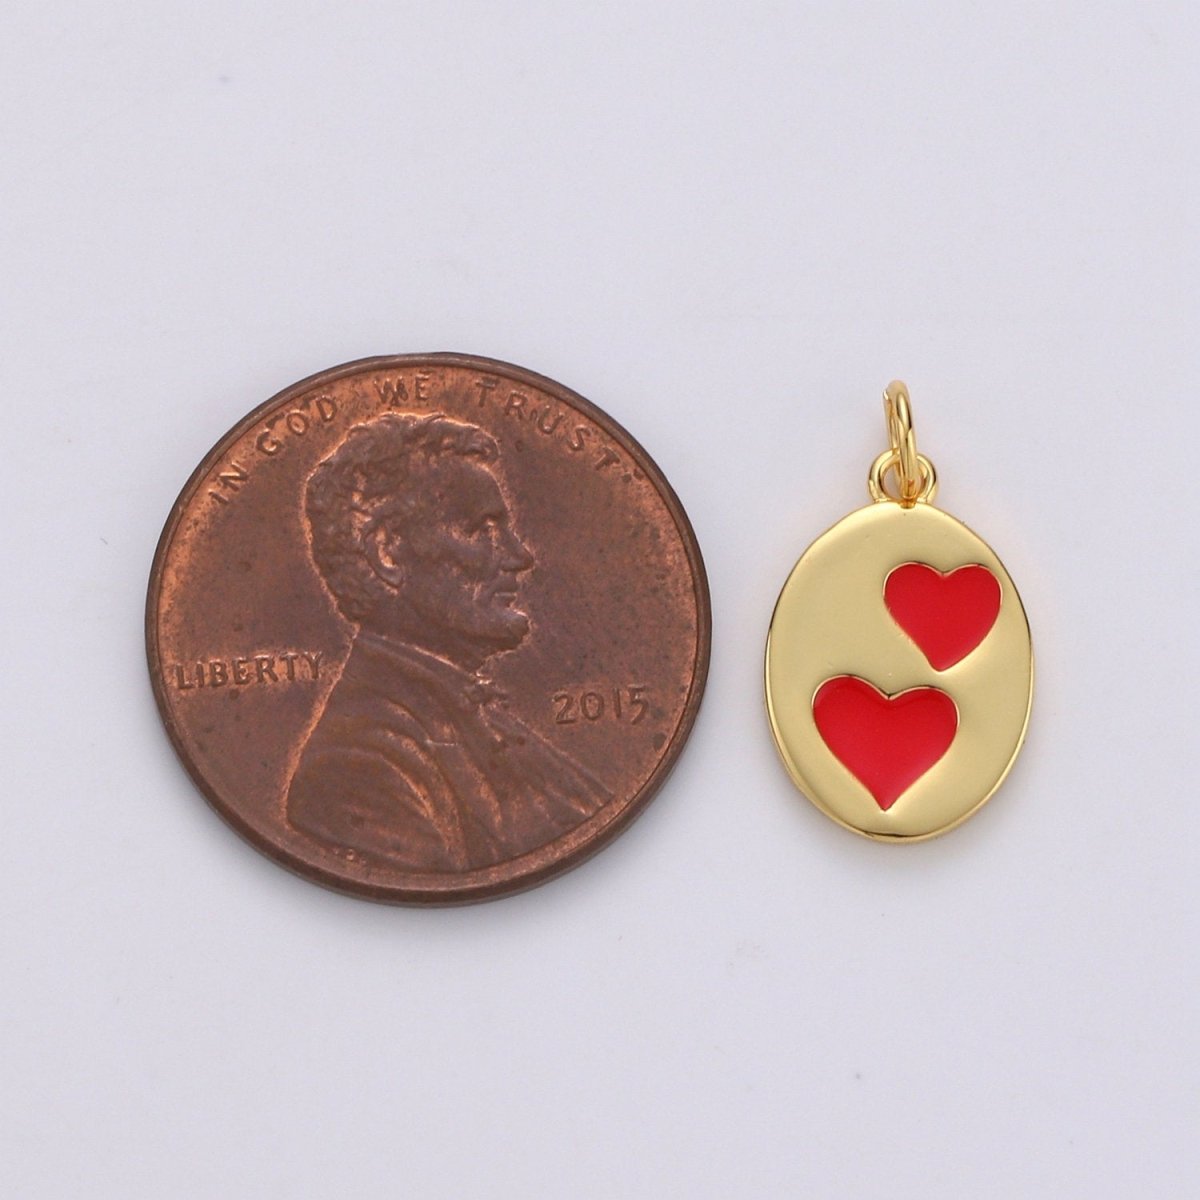 Oval Red Heart Charm - Dainty Gold Double Heart Add On Charm - Dainty Heart - Love Inspired Gold Filled Heart Pendant Couple Jewelry D-713 - DLUXCA